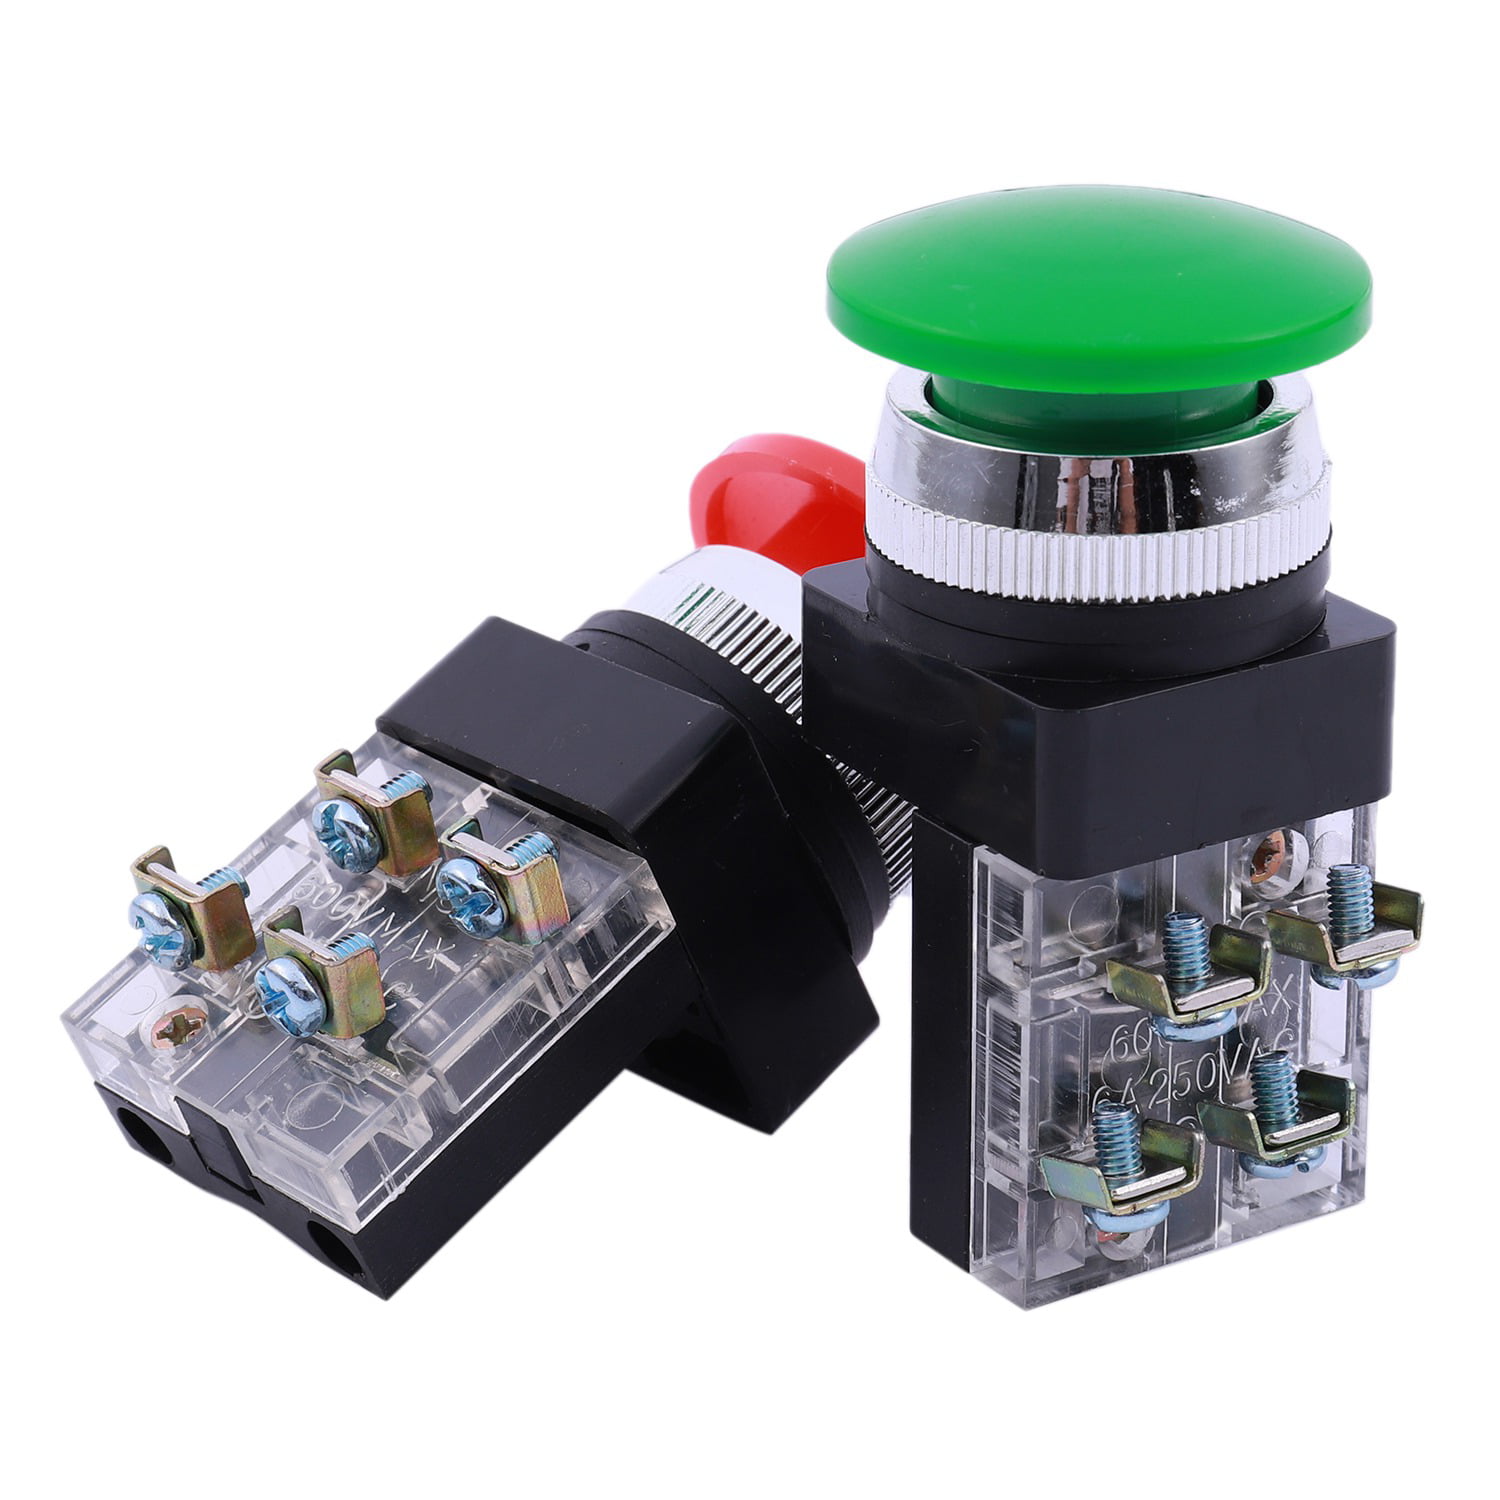 Red Green AC 250V 6A DPST Momentary Green Mushroom Head Push Button Switch